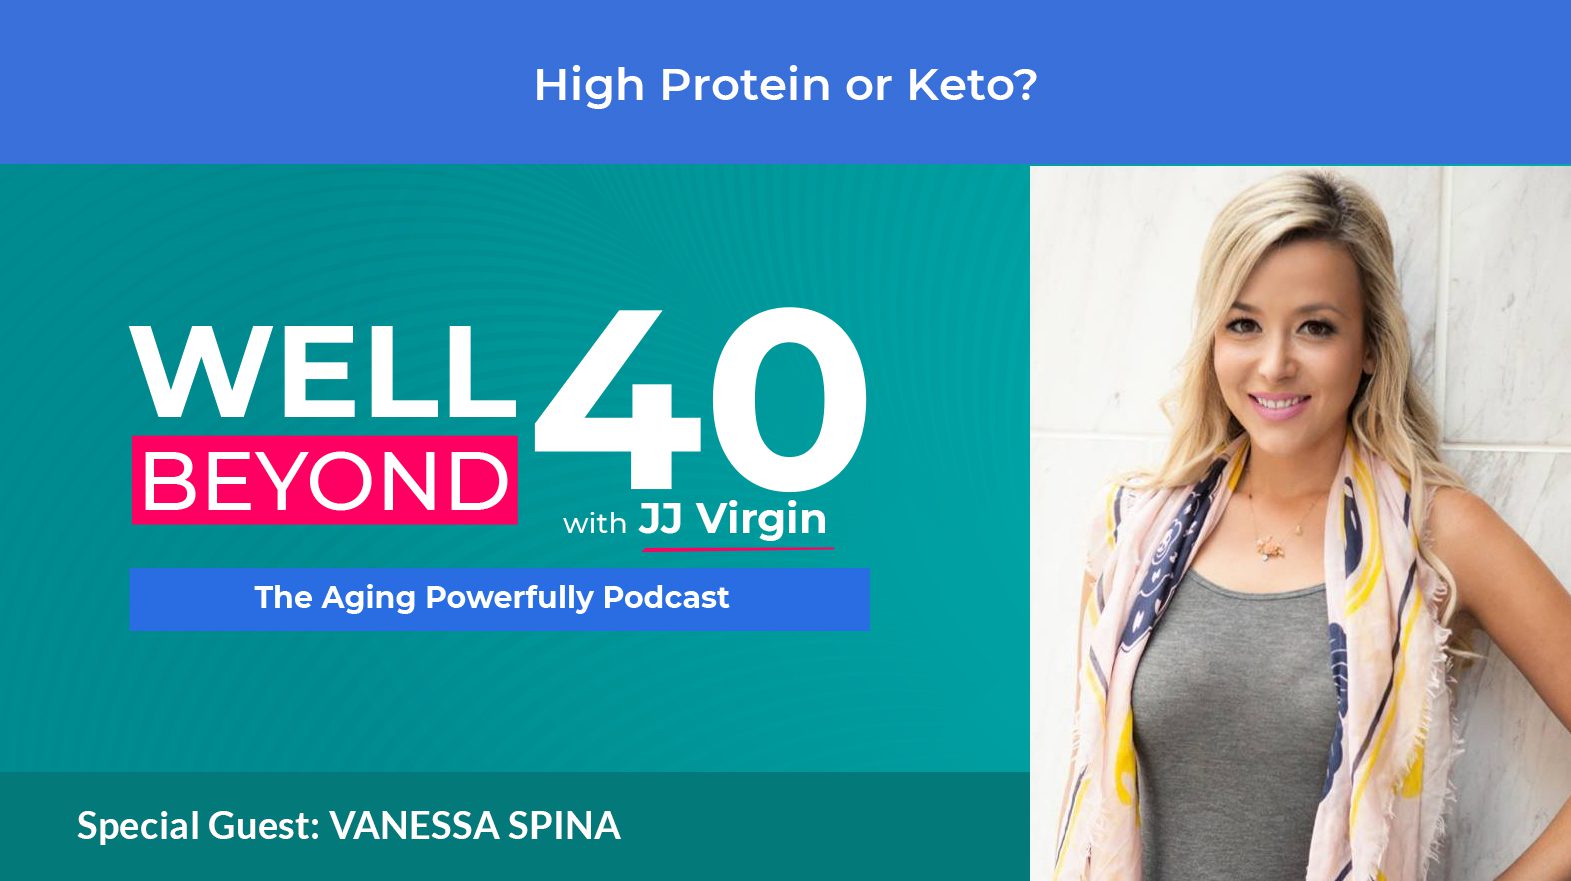 High Protein or Keto? with Vanessa Spina | Ep. 629